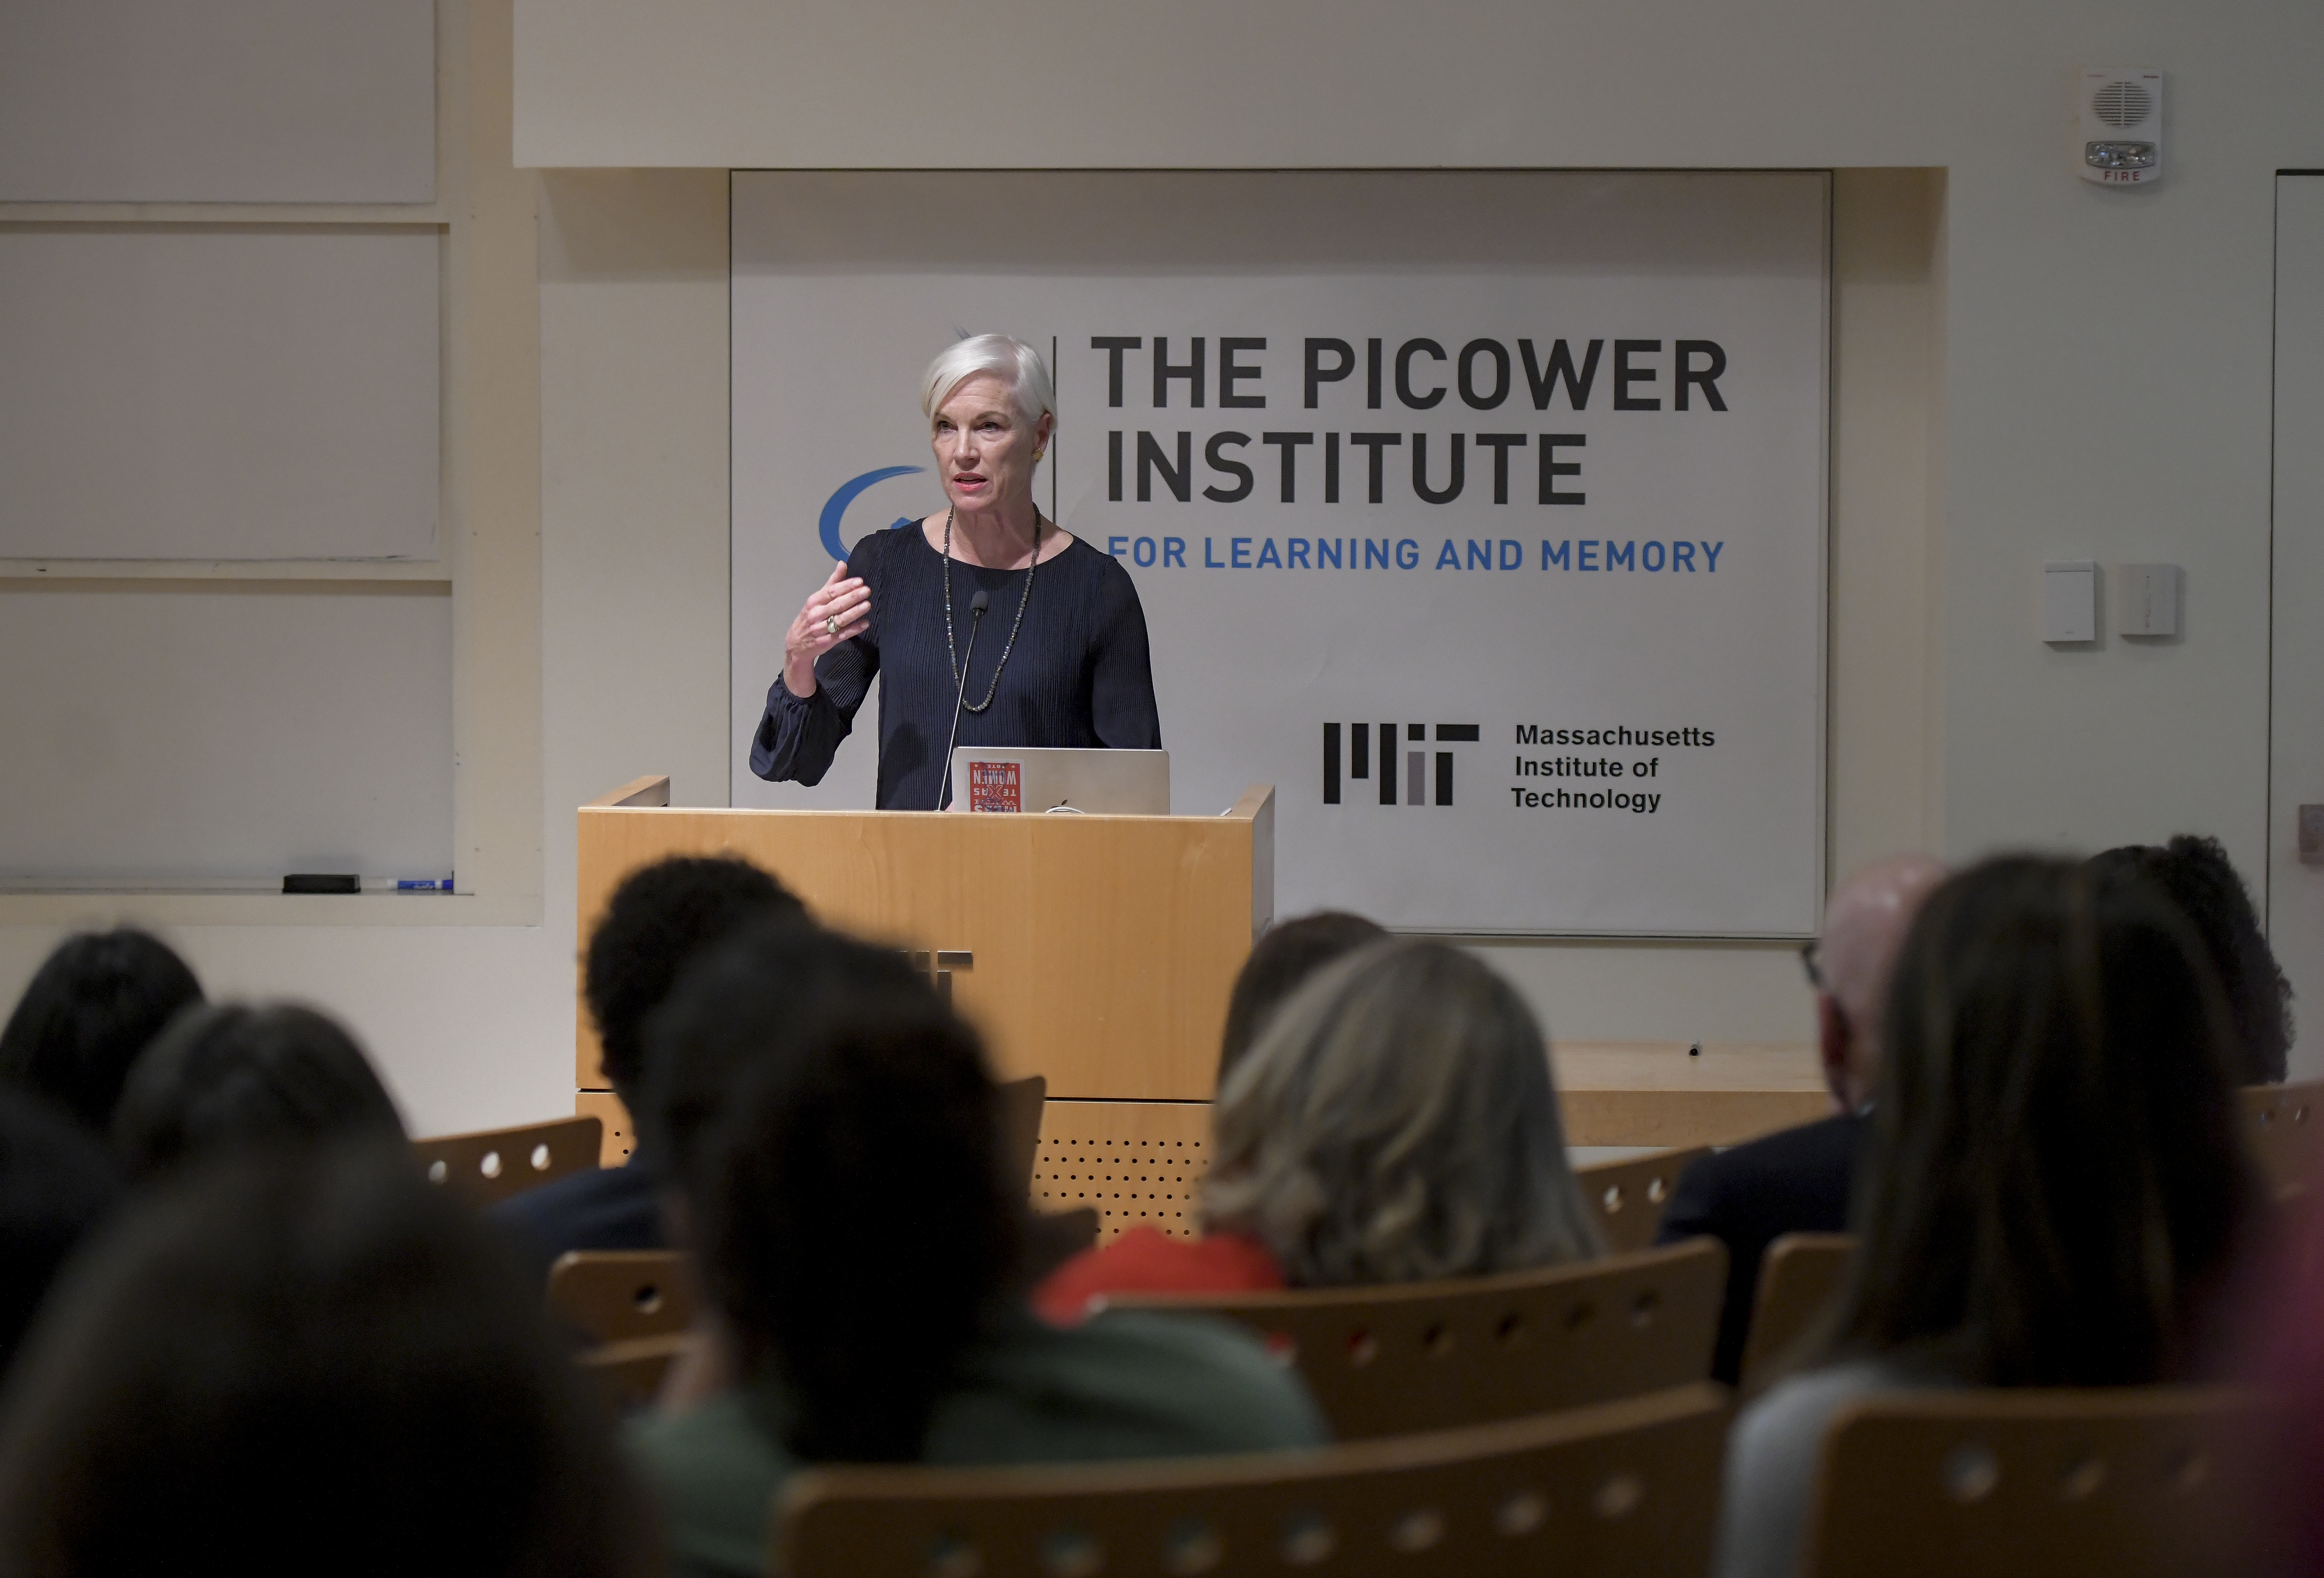 Cecile Richards stands behind a wooden podium in front of a background with the Picower Institute and MIT logos. In the foreground are several members of the audience out of focus.